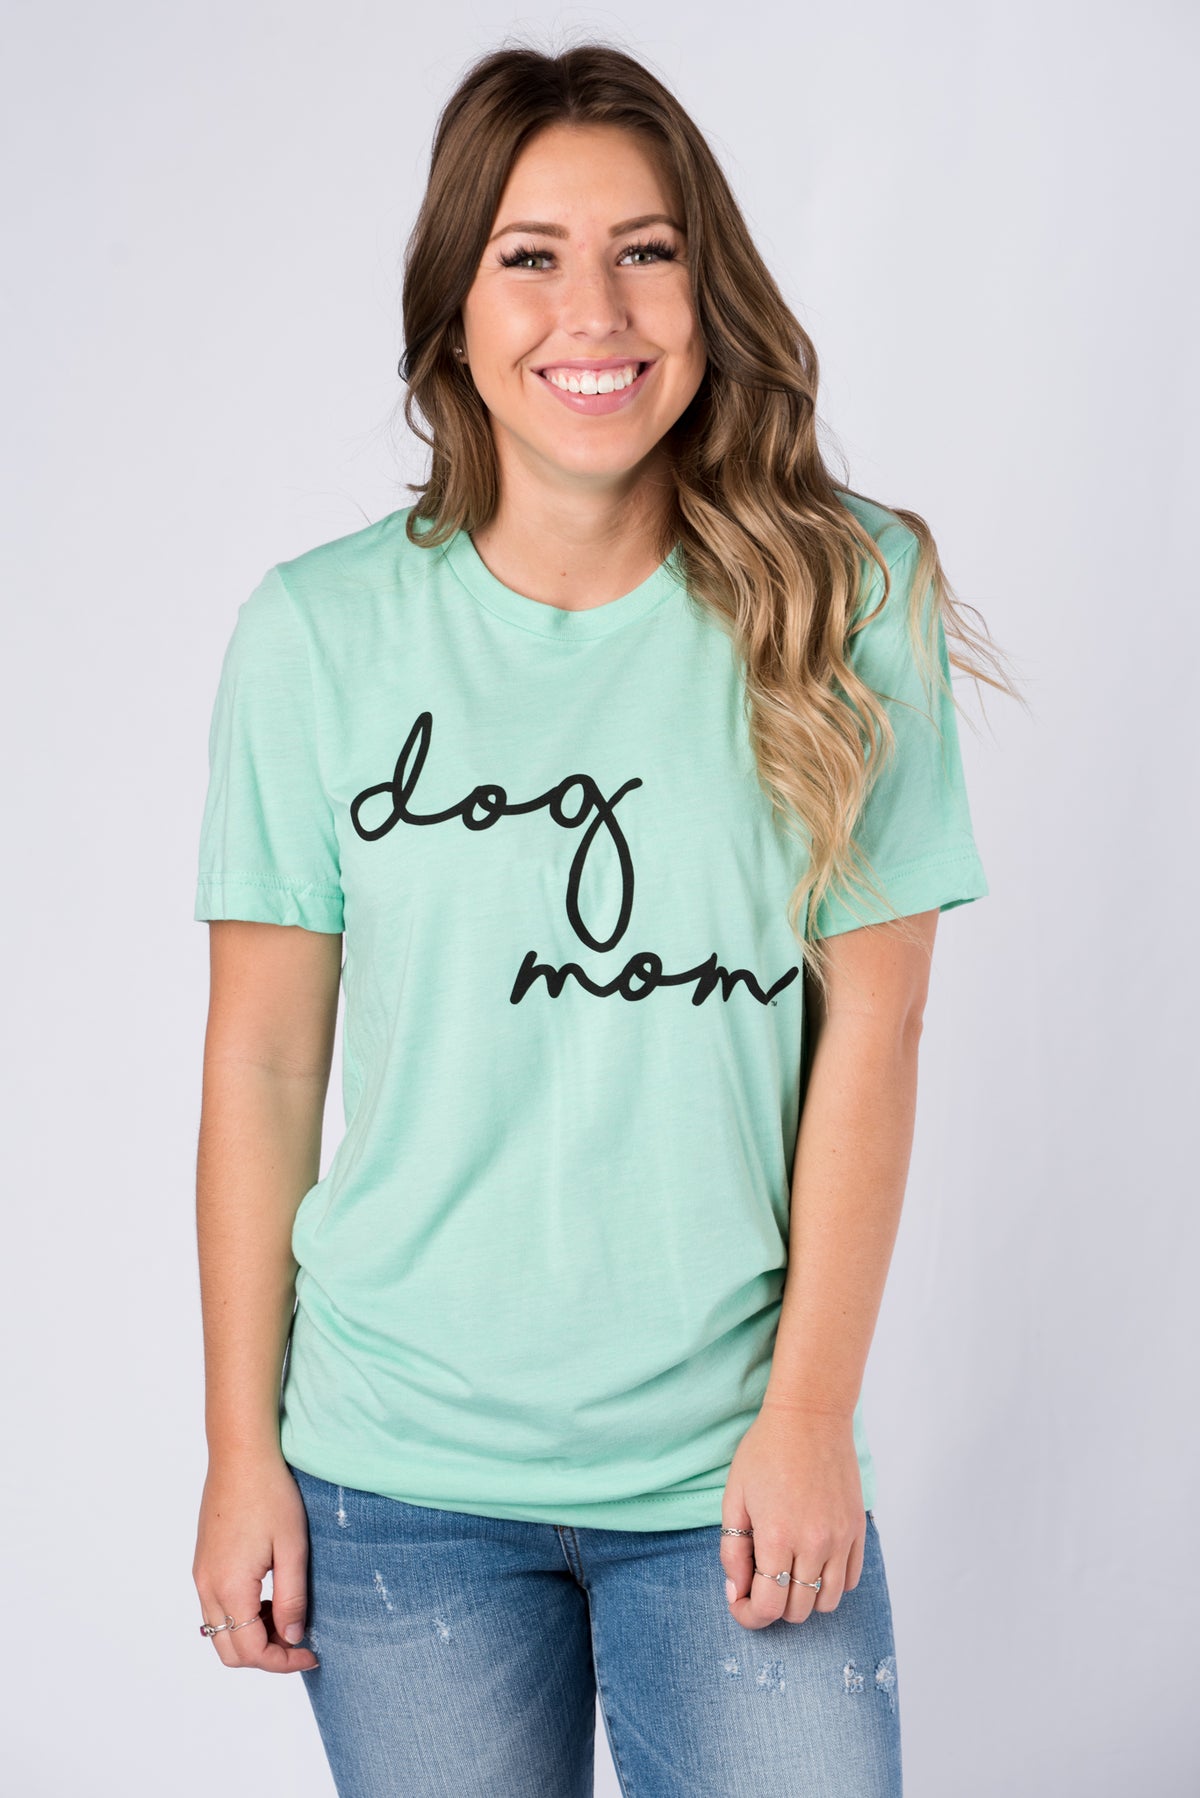 Dog mom large pride script short sleeve crew neck t-shirt mint - Stylish T-shirts - Trendy Graphic T-Shirts and Tank Tops at Lush Fashion Lounge Boutique in Oklahoma City